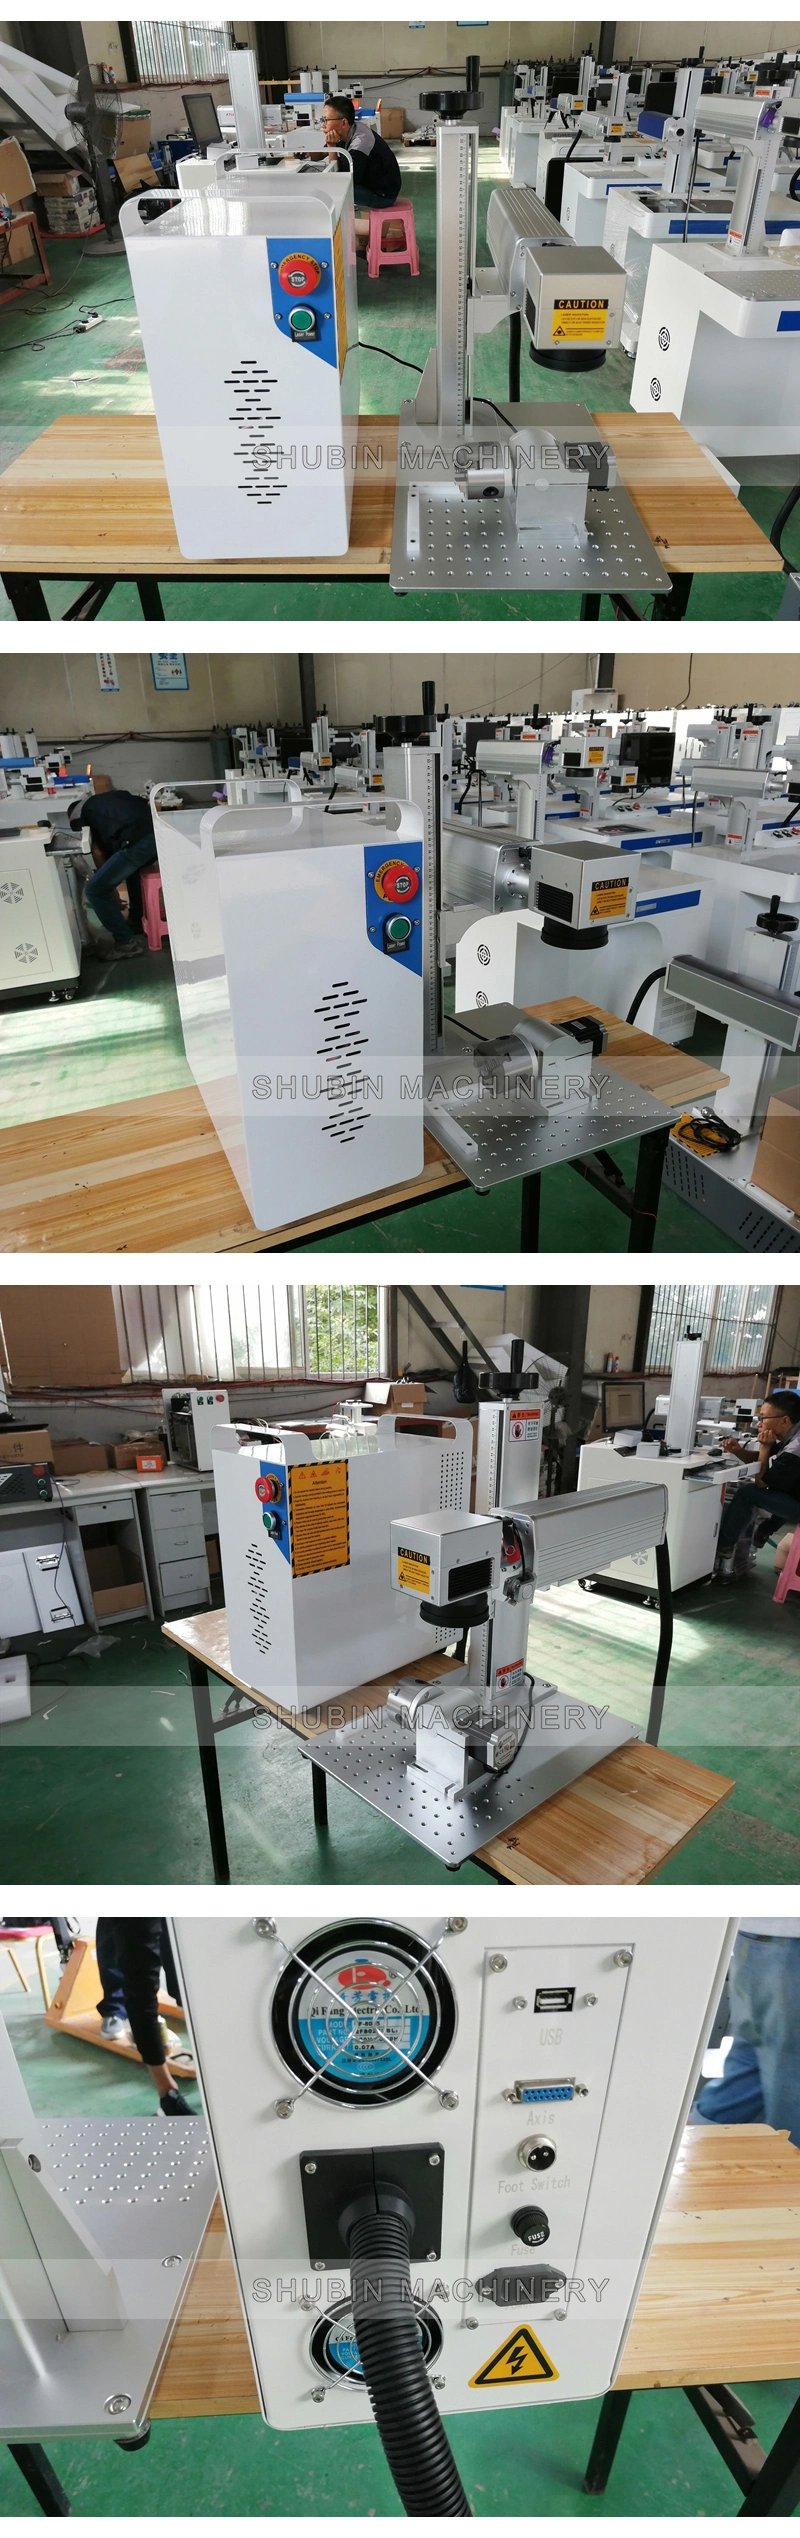 Max Jpt 50W Fiber Laser Marking Machine with Rotary Axis for Stainless Steel Copper Brass Silver